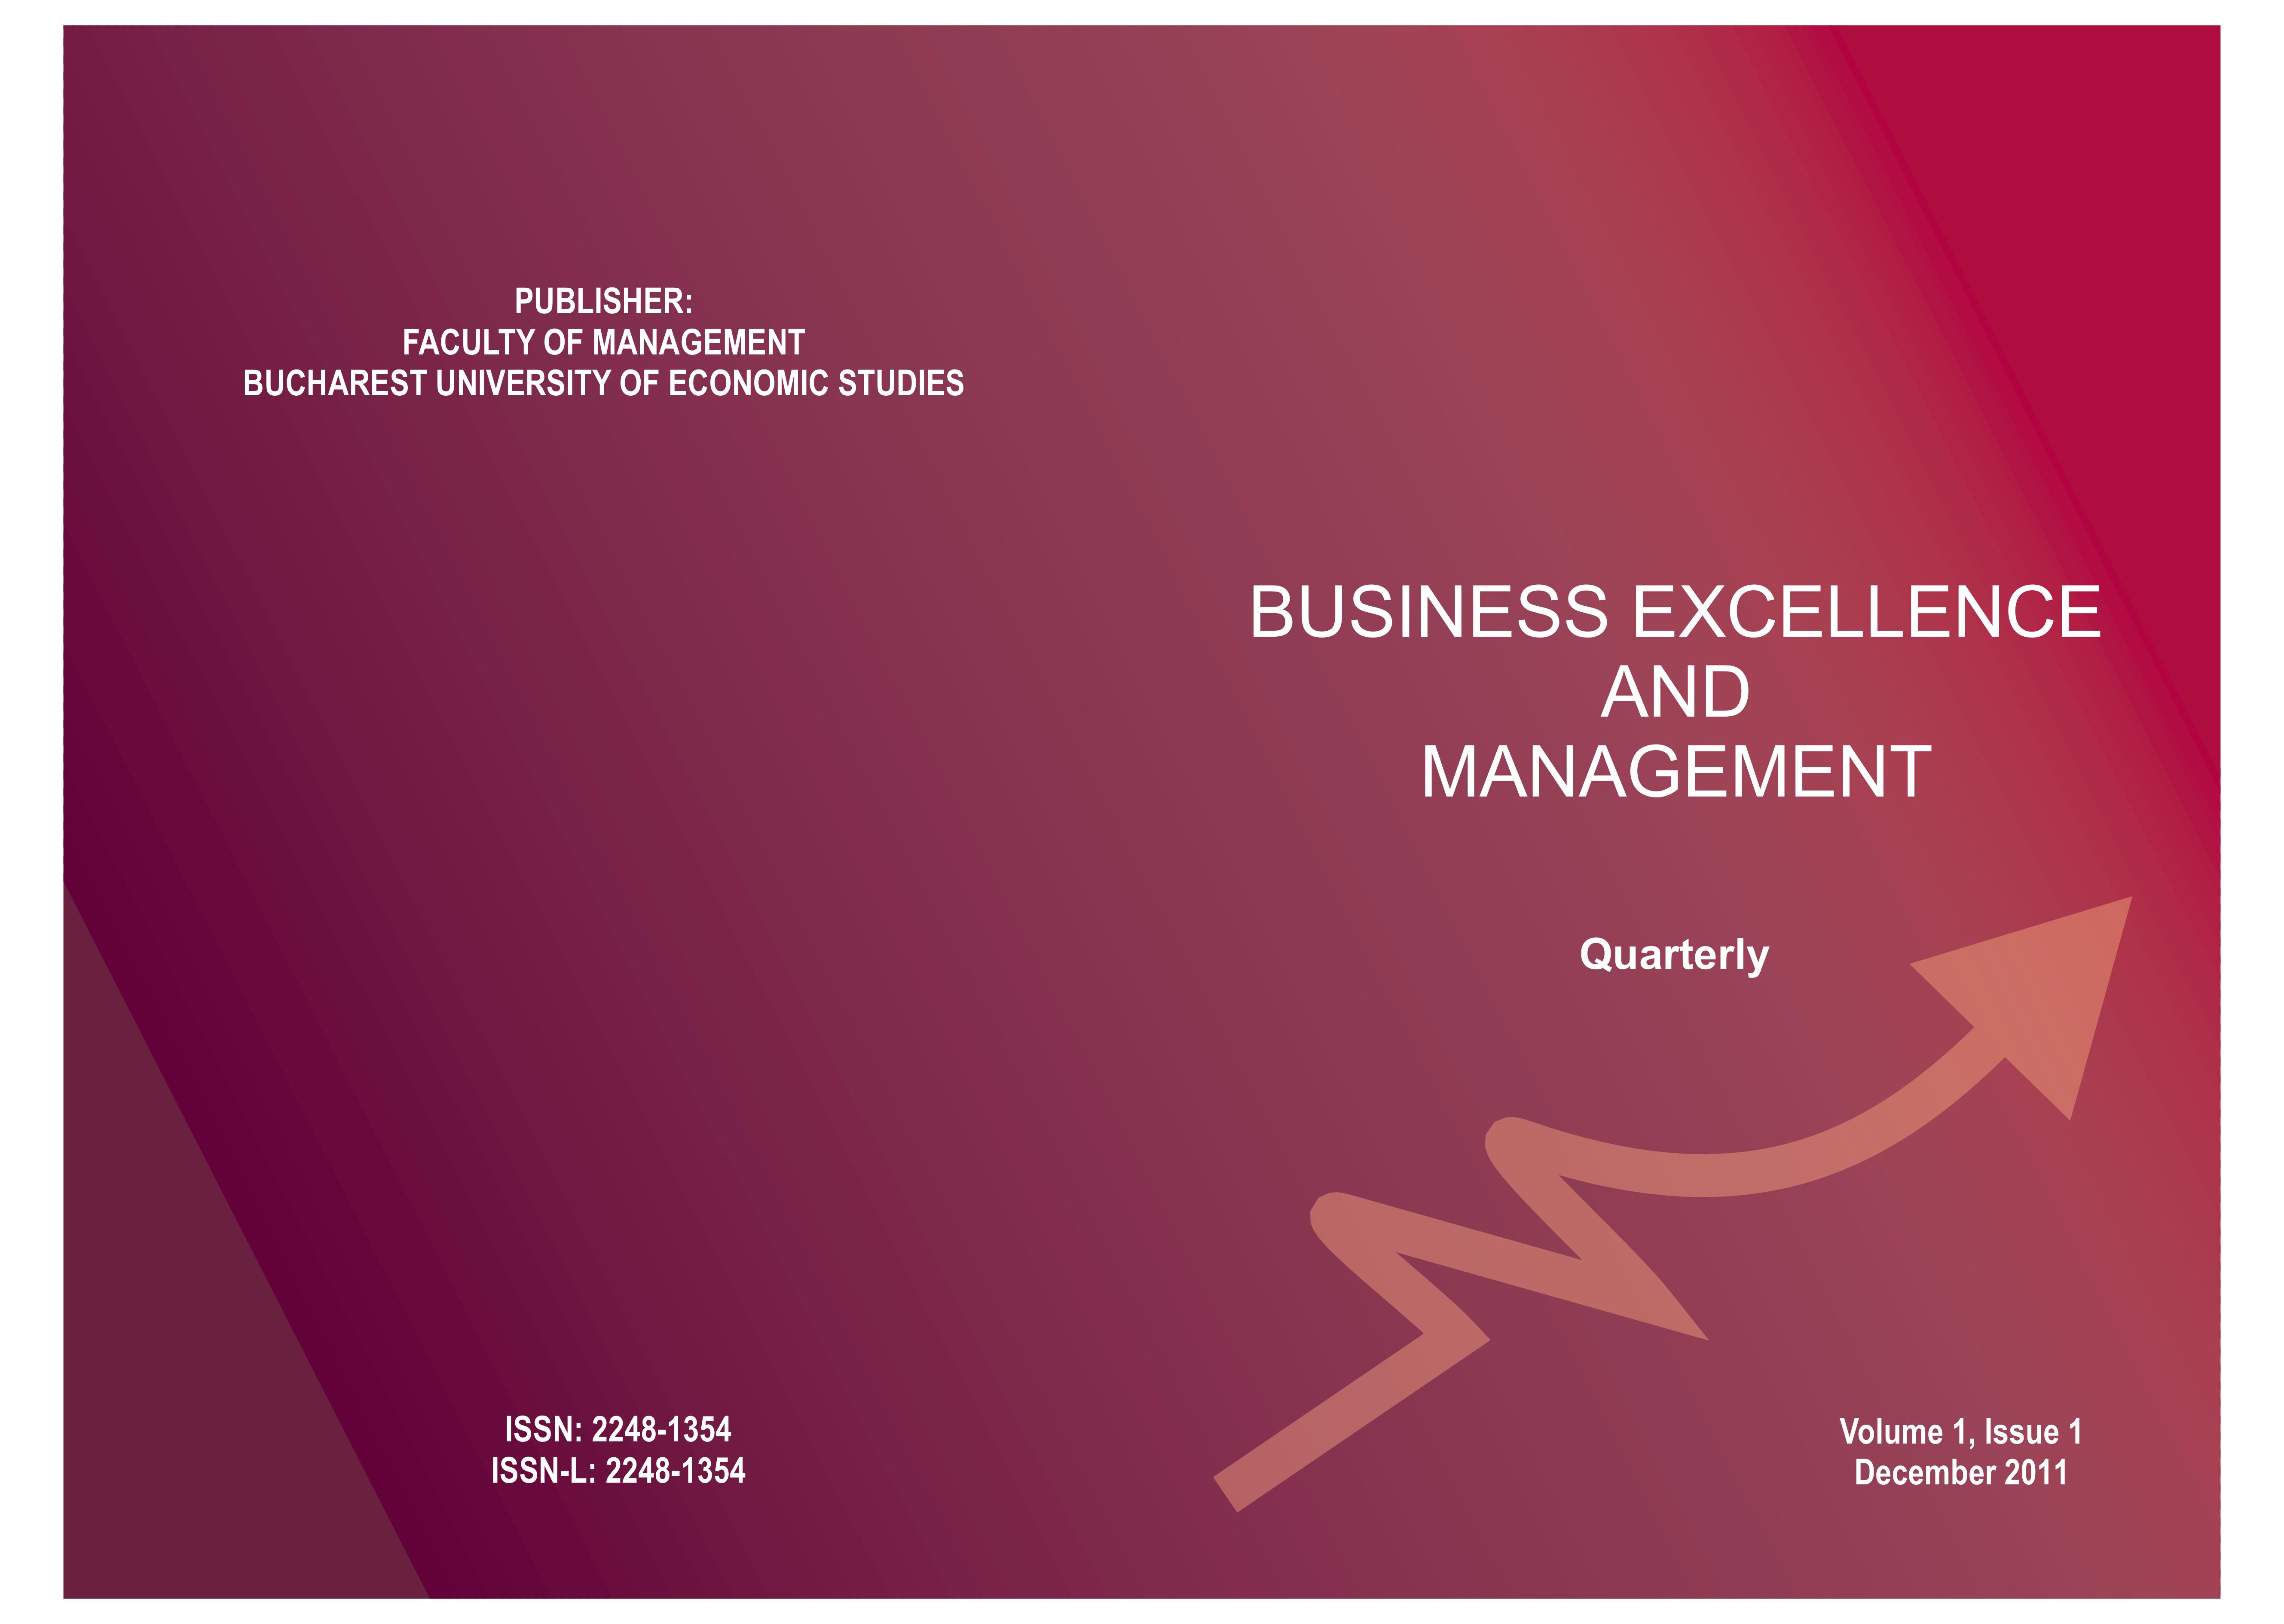 Integration and Competition - Appropriate Approaches for Achieving Excellence in Management